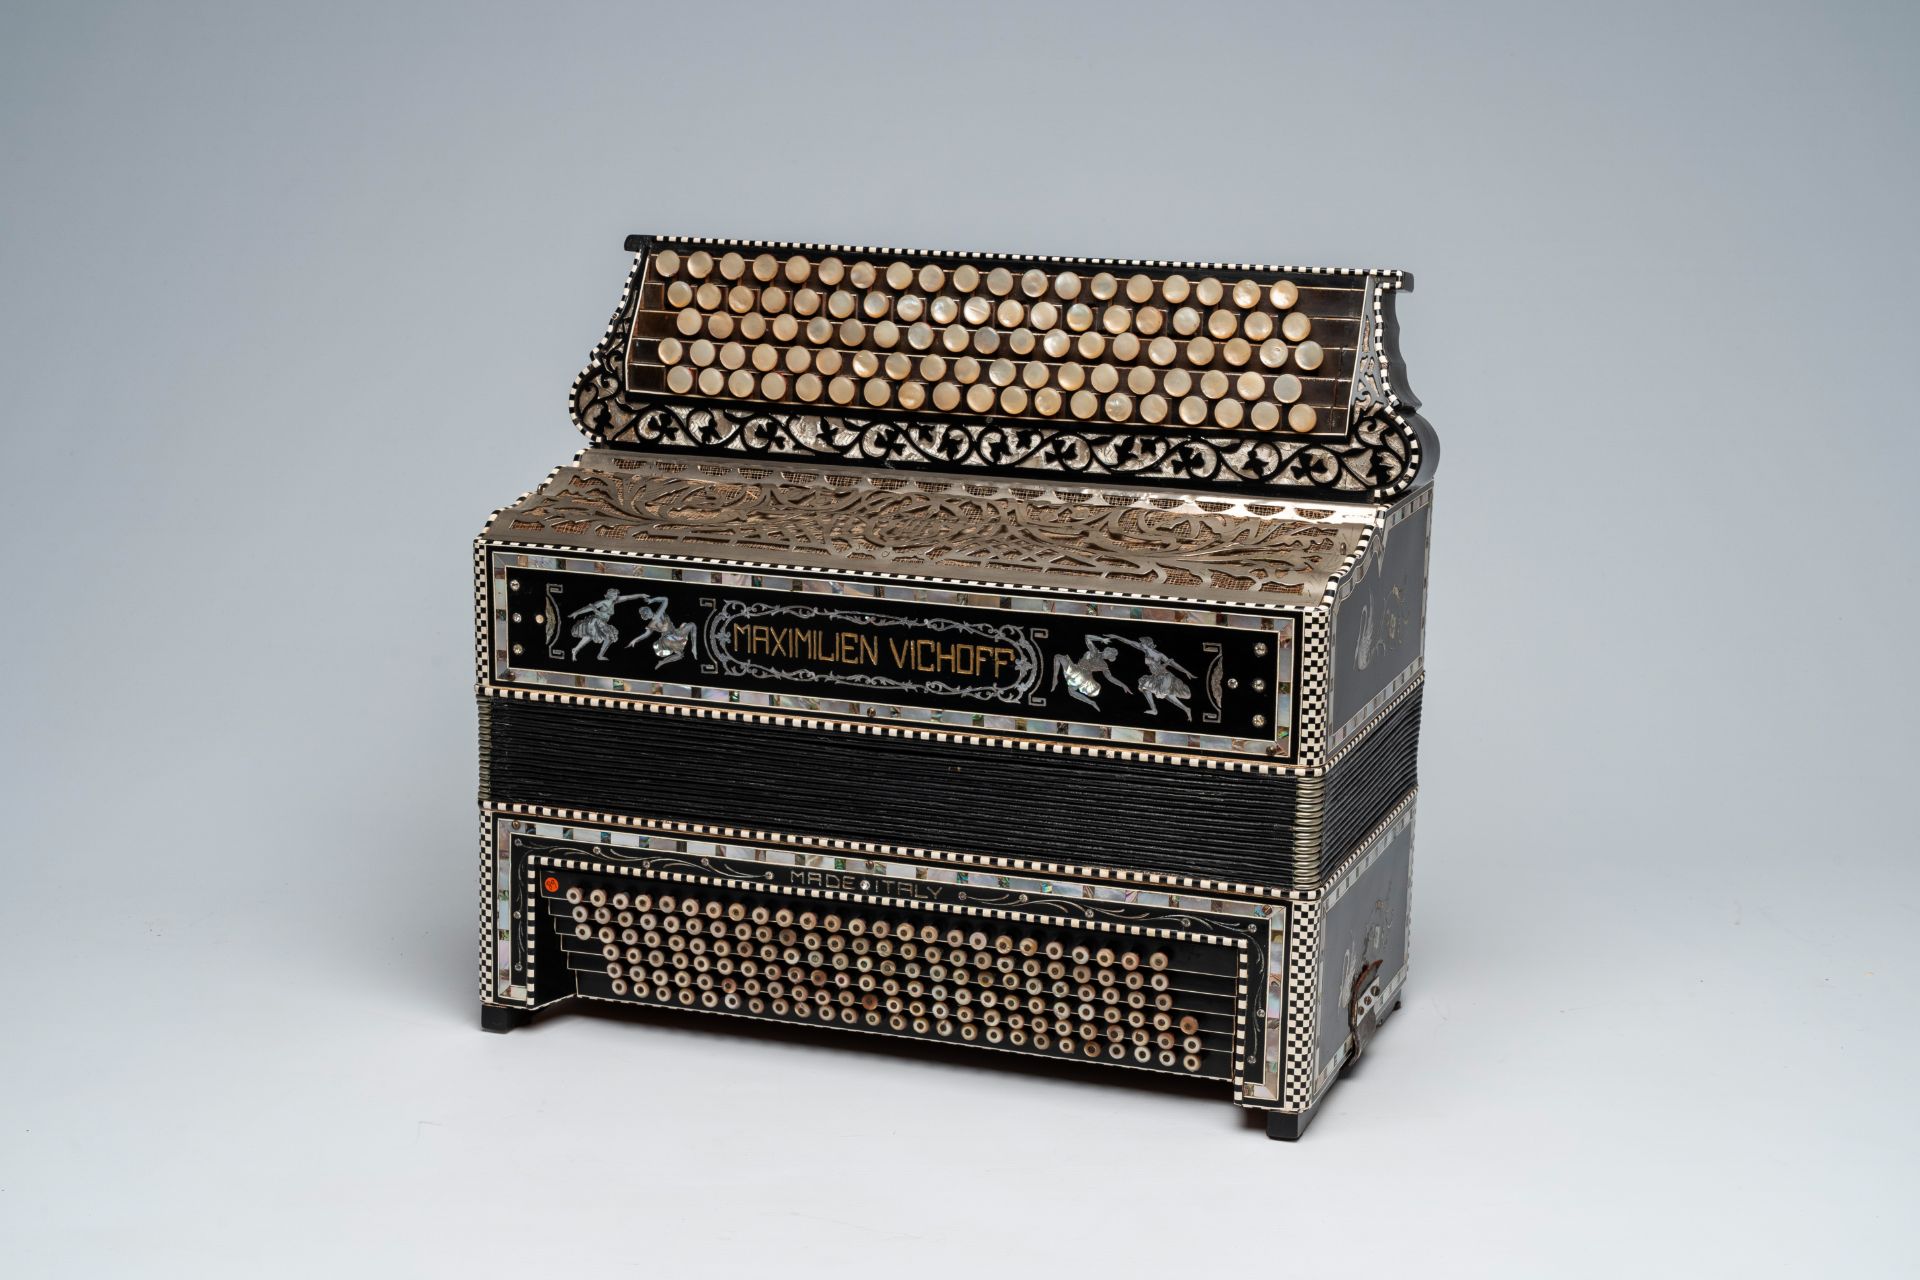 An Italian 'Maximilien Vichoff' chromatic accordion with button keyboard and box, ca. 1930 - Image 2 of 6